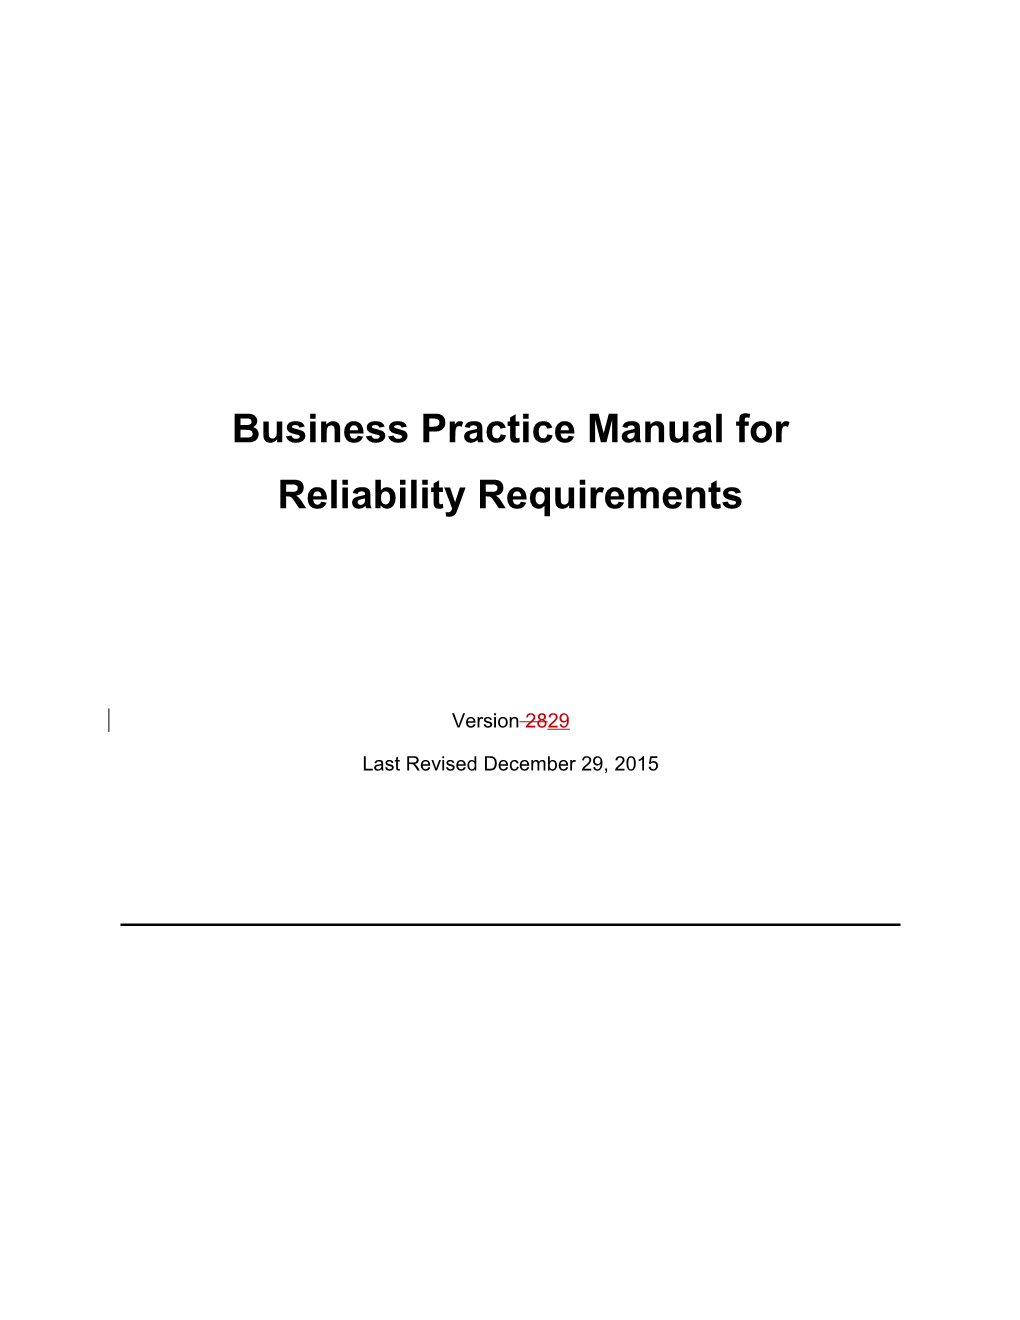 ISO Business Practice Manual BPM for Reliability Requirements